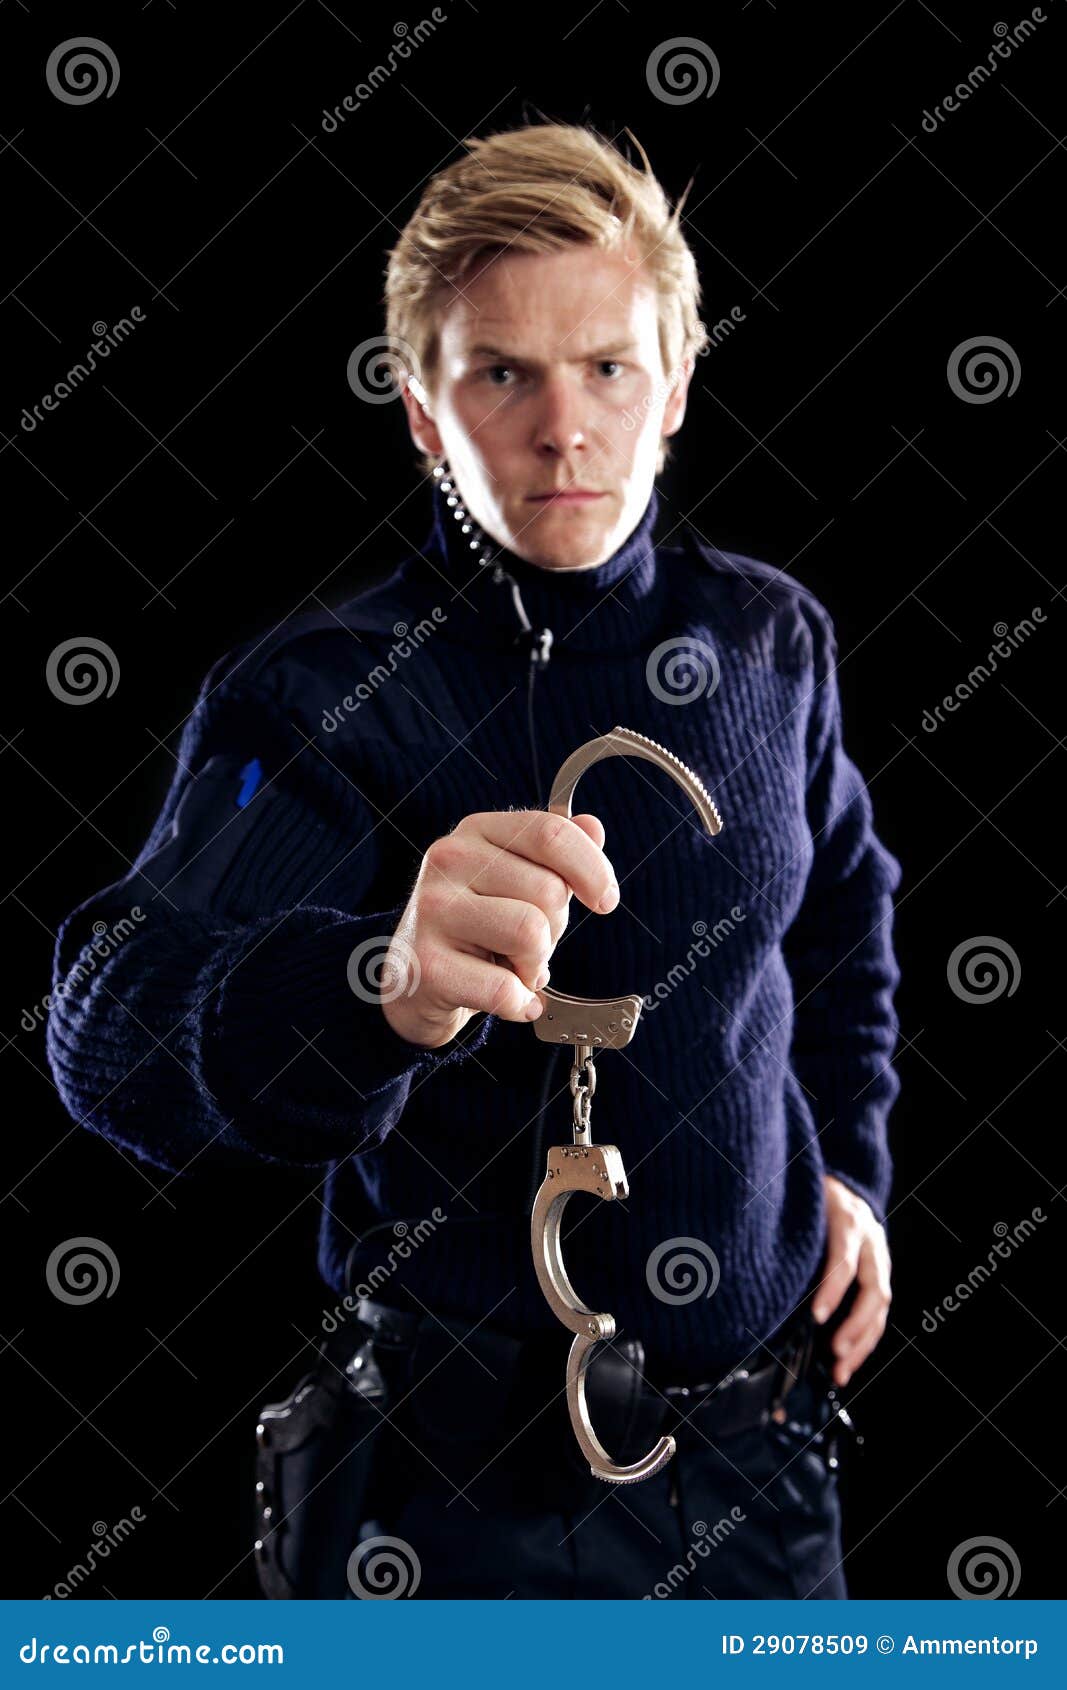 You Are Under Arrest Royalty Free Stock Images - Image: 29078509